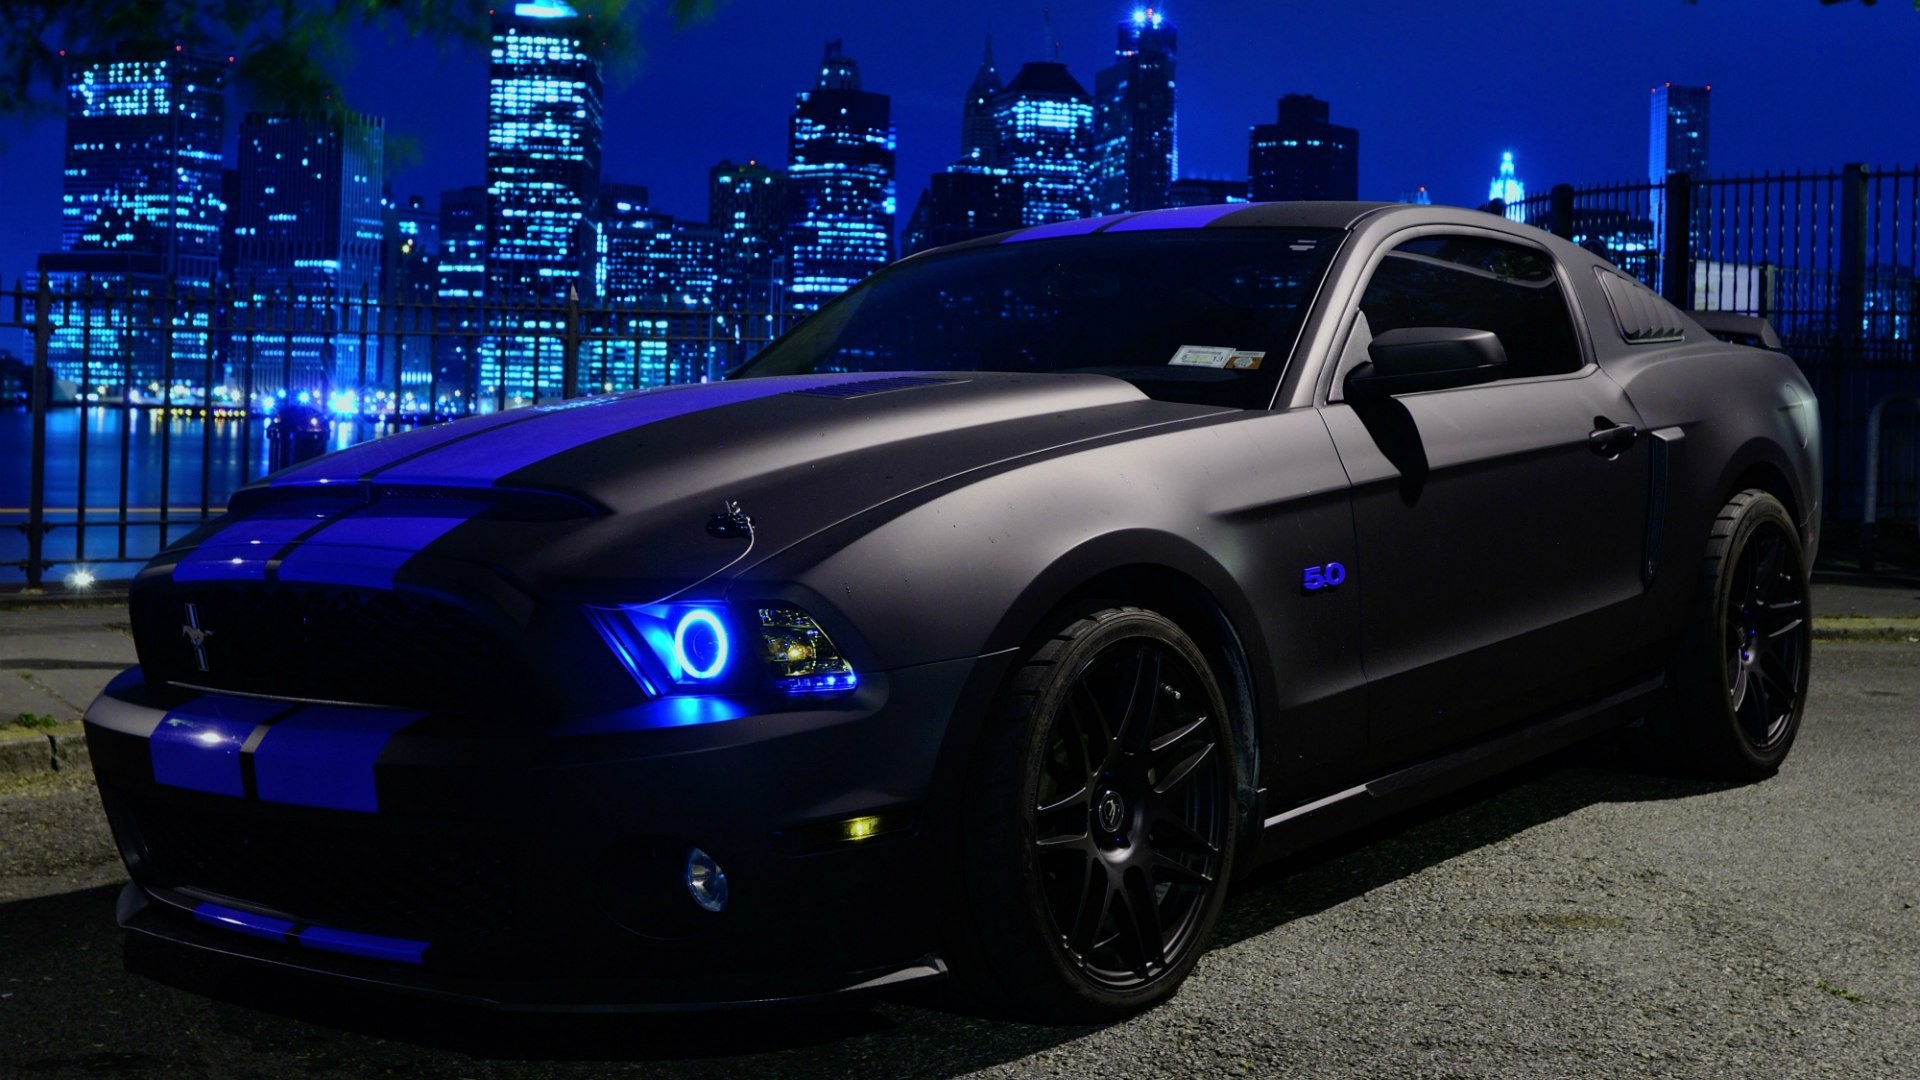 1920x1080 Luxury SUV Ford Mustang Hd Wallpaper New Concept